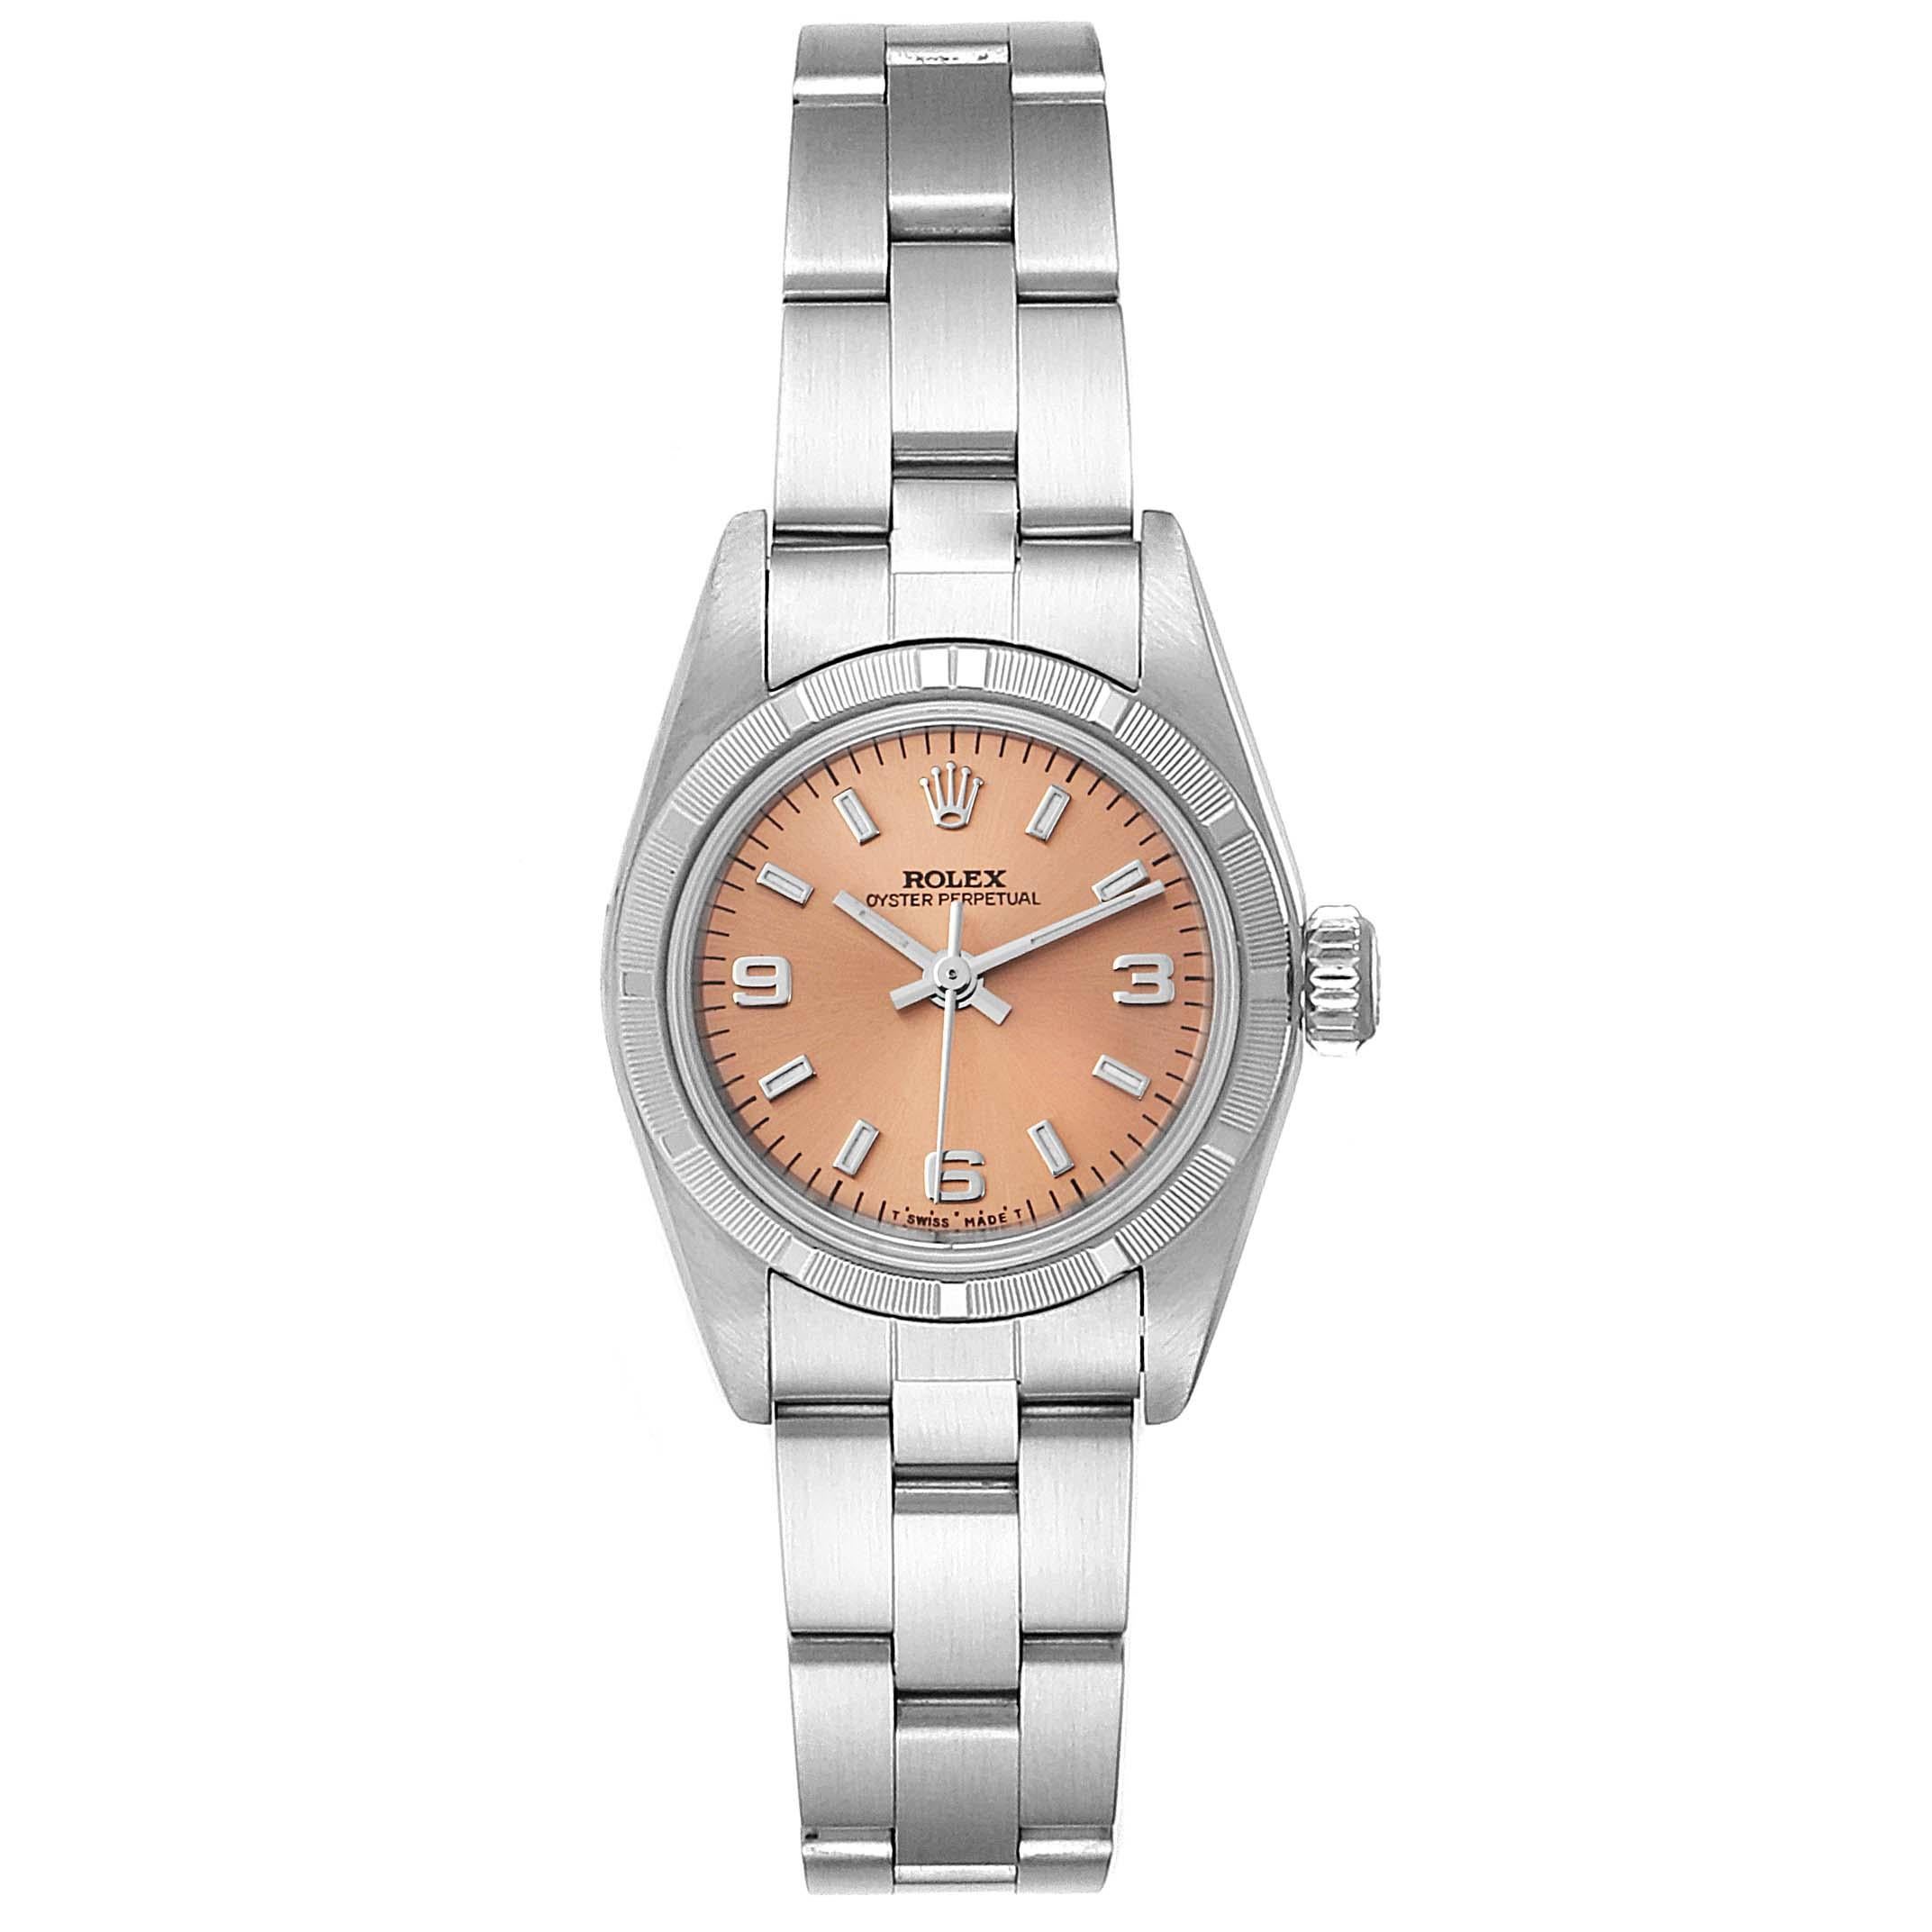 Rolex Oyster Perpetual Salmon Dial Oyster Bracelet Ladies Watch 67230. Officially certified chronometer self-winding movement. Stainless steel oyster case 24.0 mm in diameter. Rolex logo on a crown. Stainless steel engine turned bezel. Scratch